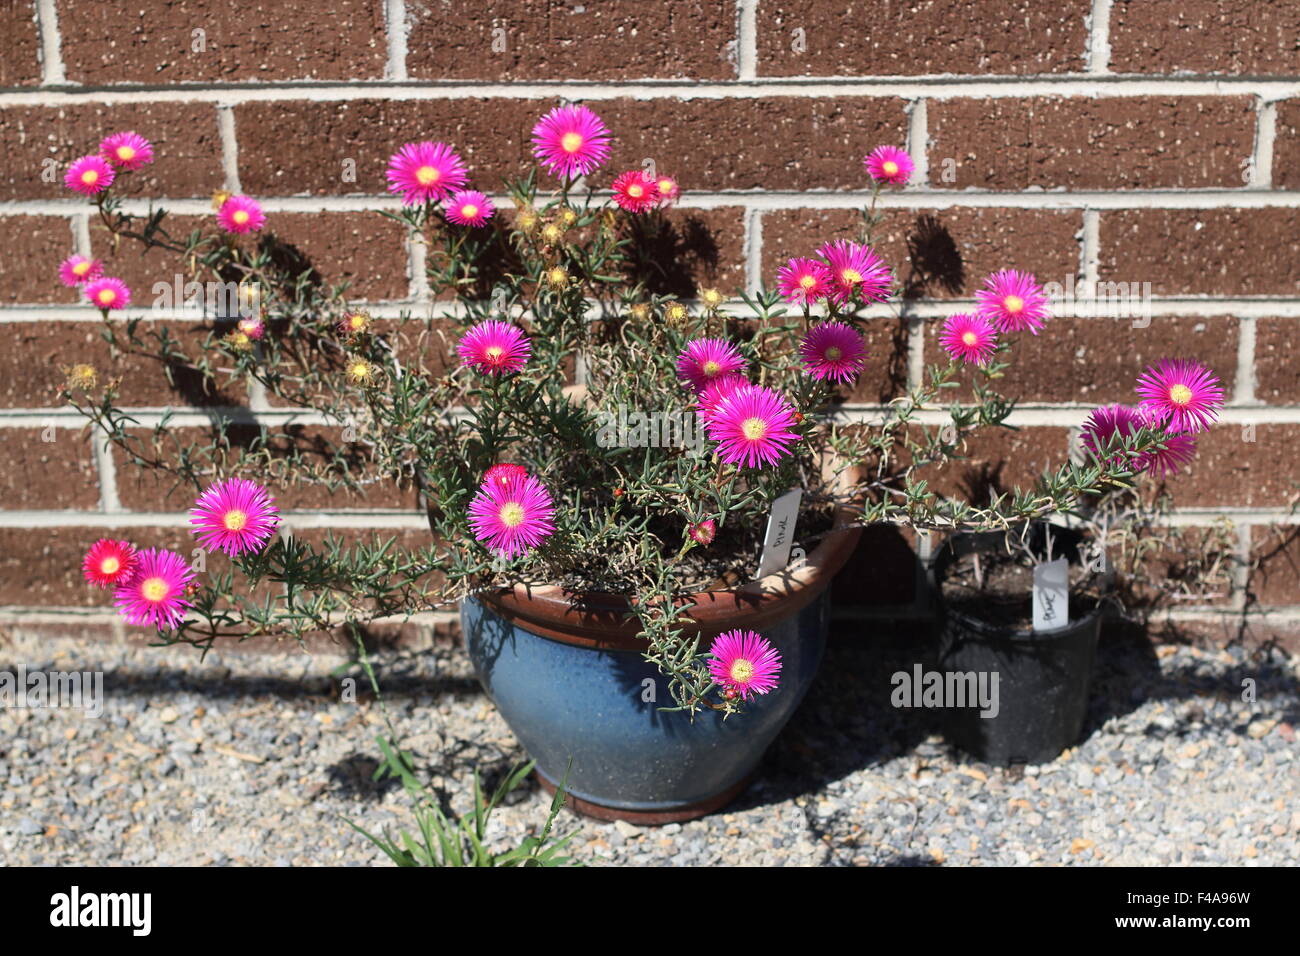 Pink Pig face flowers or Mesembryanthemum , ice plant flowers, Livingstone Daisies in full bloom growing in a pot Stock Photo